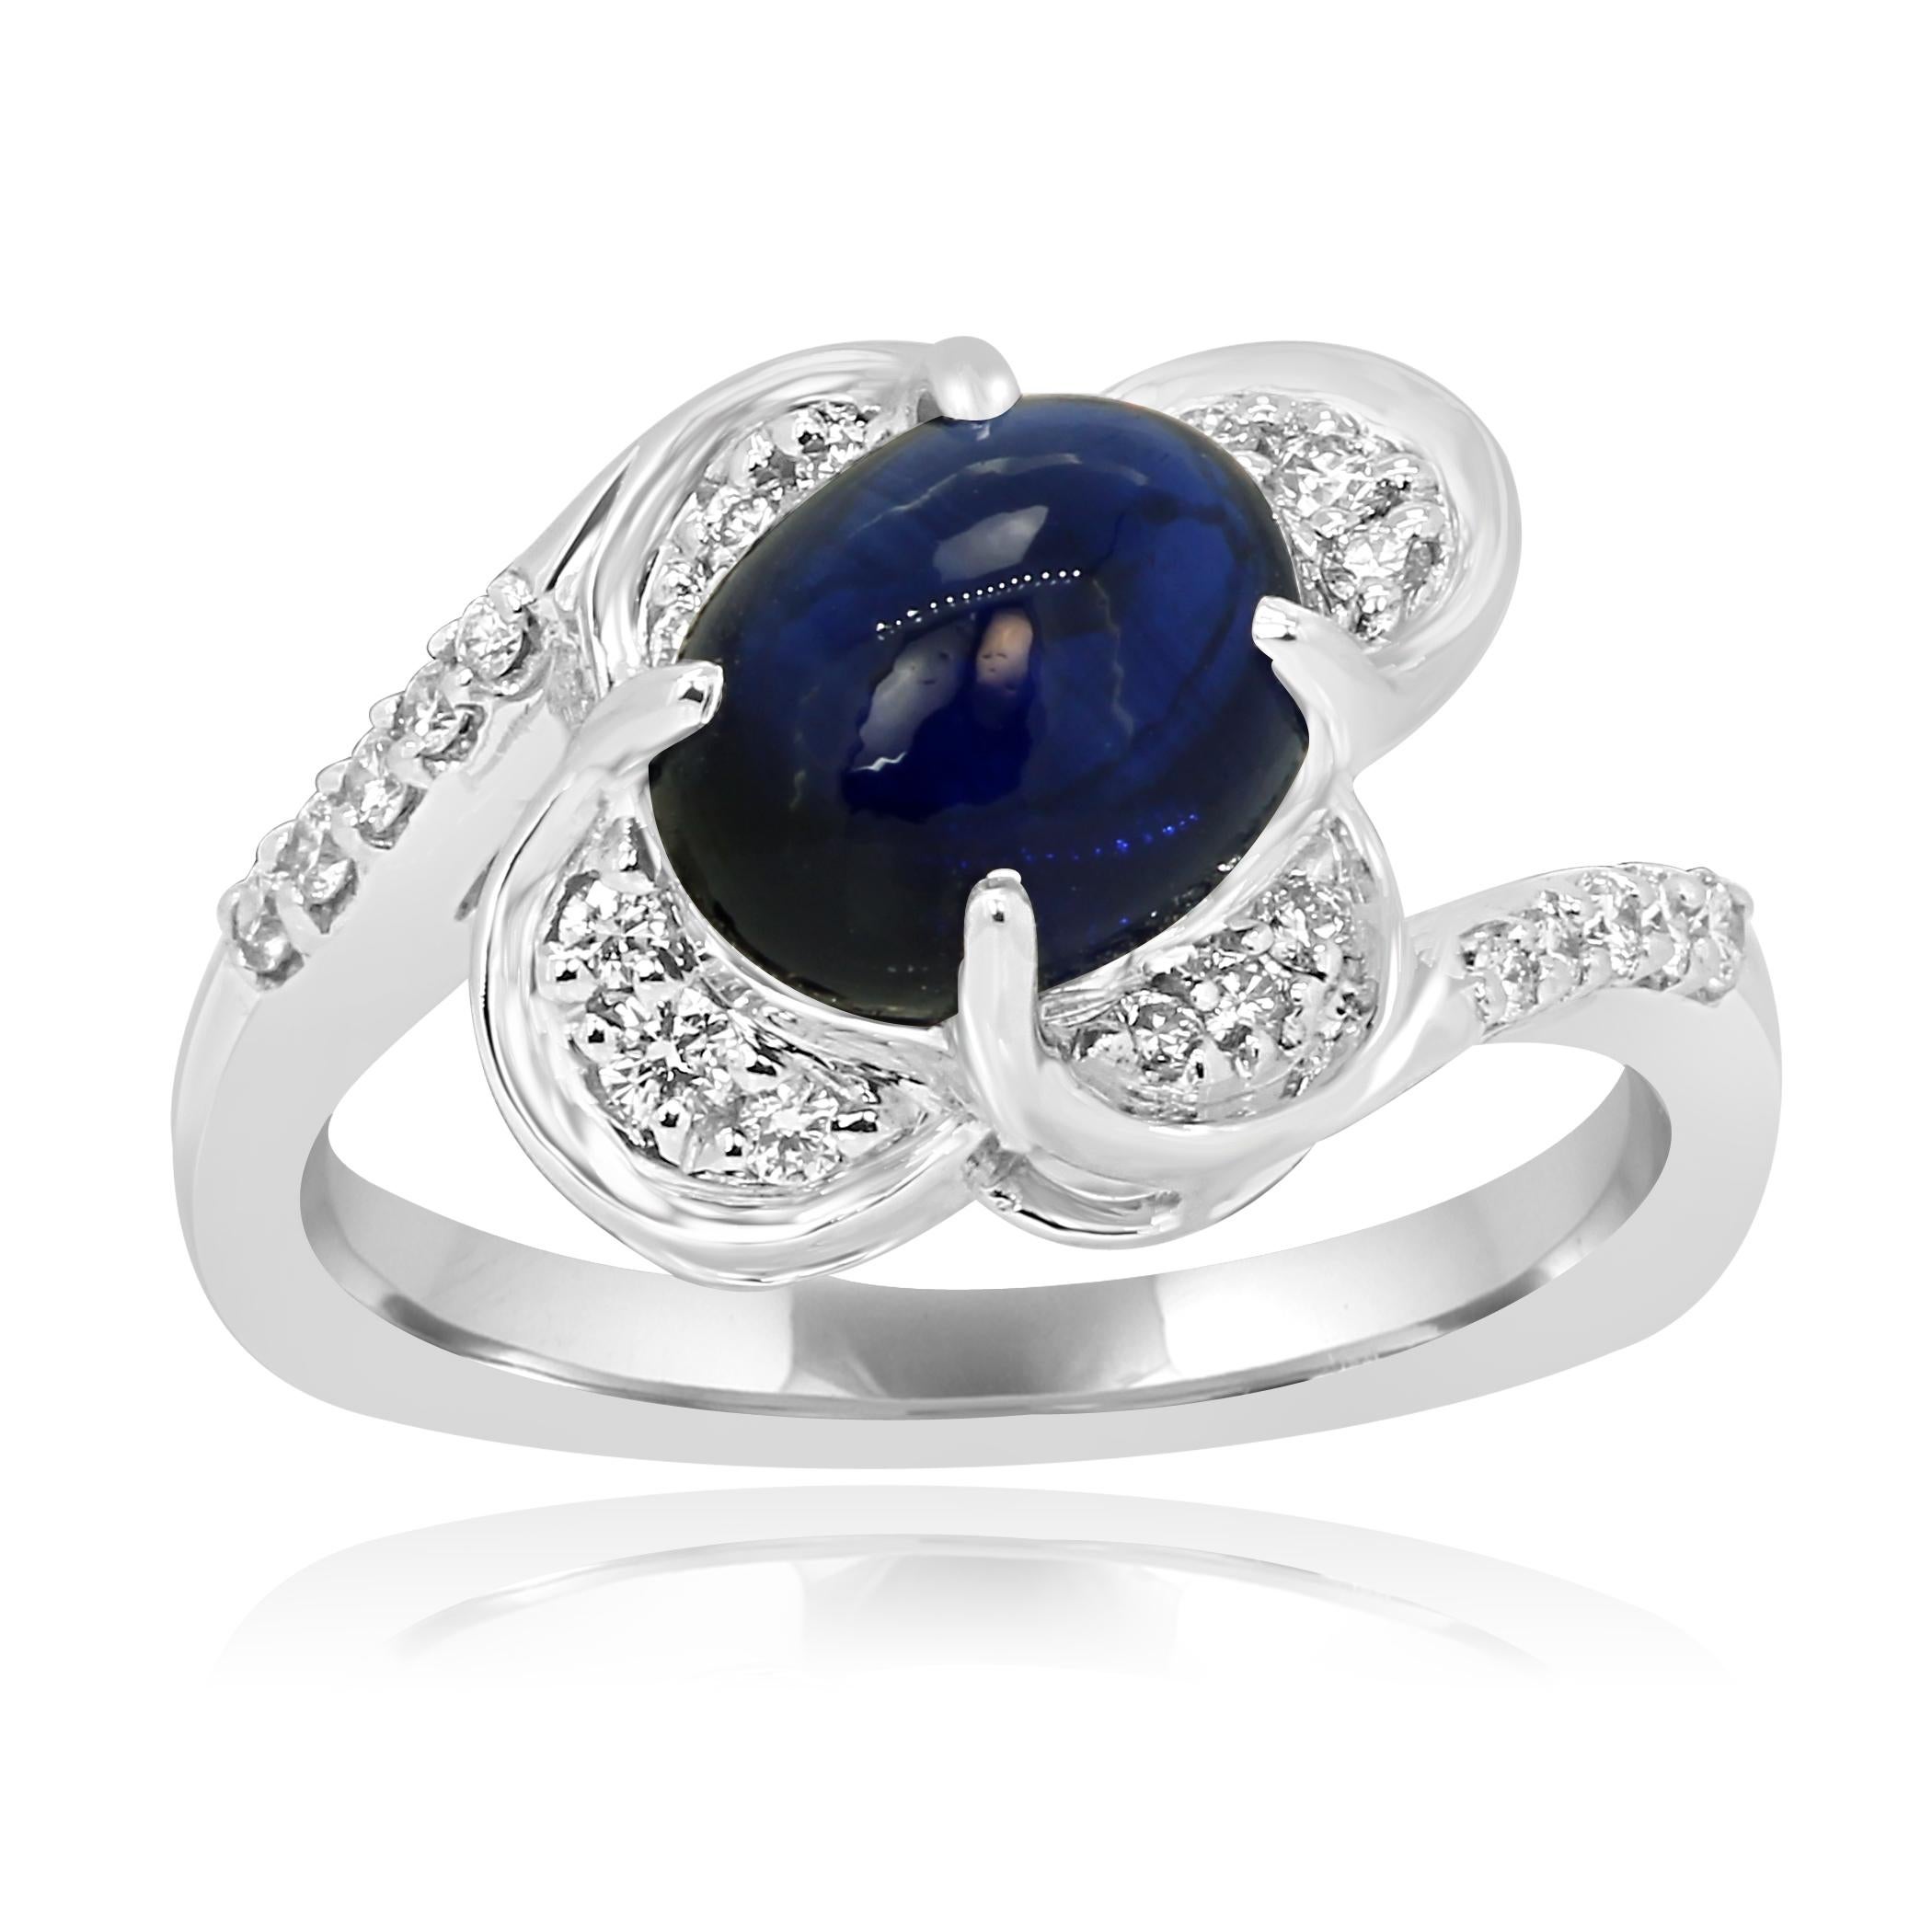 Stunning GIA Certified 3.04 Carat Blue Sapphire Oval Cabochon Heated only Encircled in Halo of Colorless VS-SI Diamonds 0.22 Carat in Gorgeous 14K White Gold Cocktail Fashion Ring. Total Weight 3.26 Carat

Style available in different price ranges.